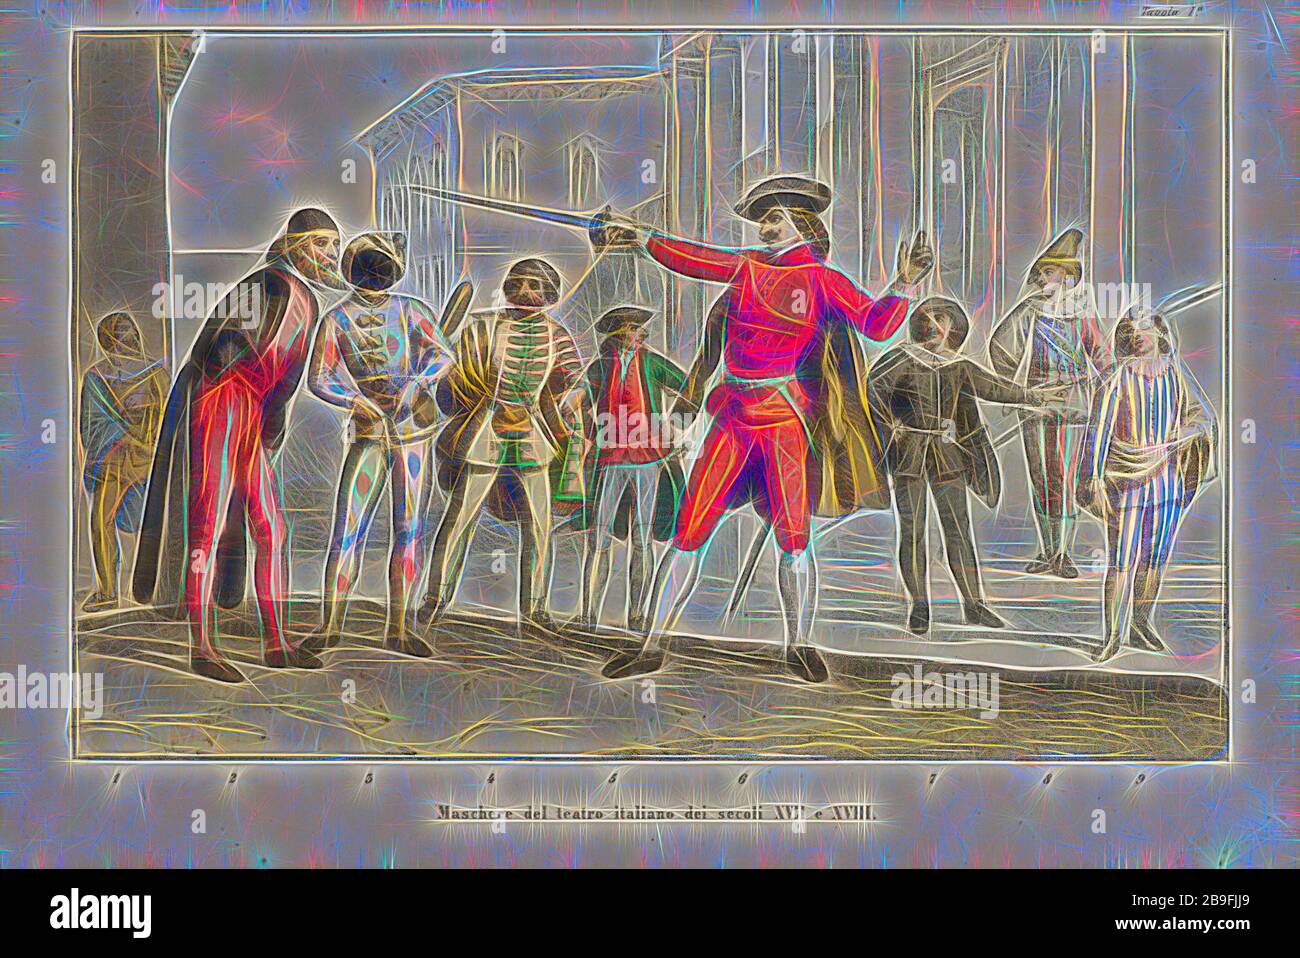 Maschera del teatro italiano dei secoli xvii e xviii tavola 1a, Italian theater prints, Reimagined by Gibon, design of warm cheerful glowing of brightness and light rays radiance. Classic art reinvented with a modern twist. Photography inspired by futurism, embracing dynamic energy of modern technology, movement, speed and revolutionize culture. Stock Photo